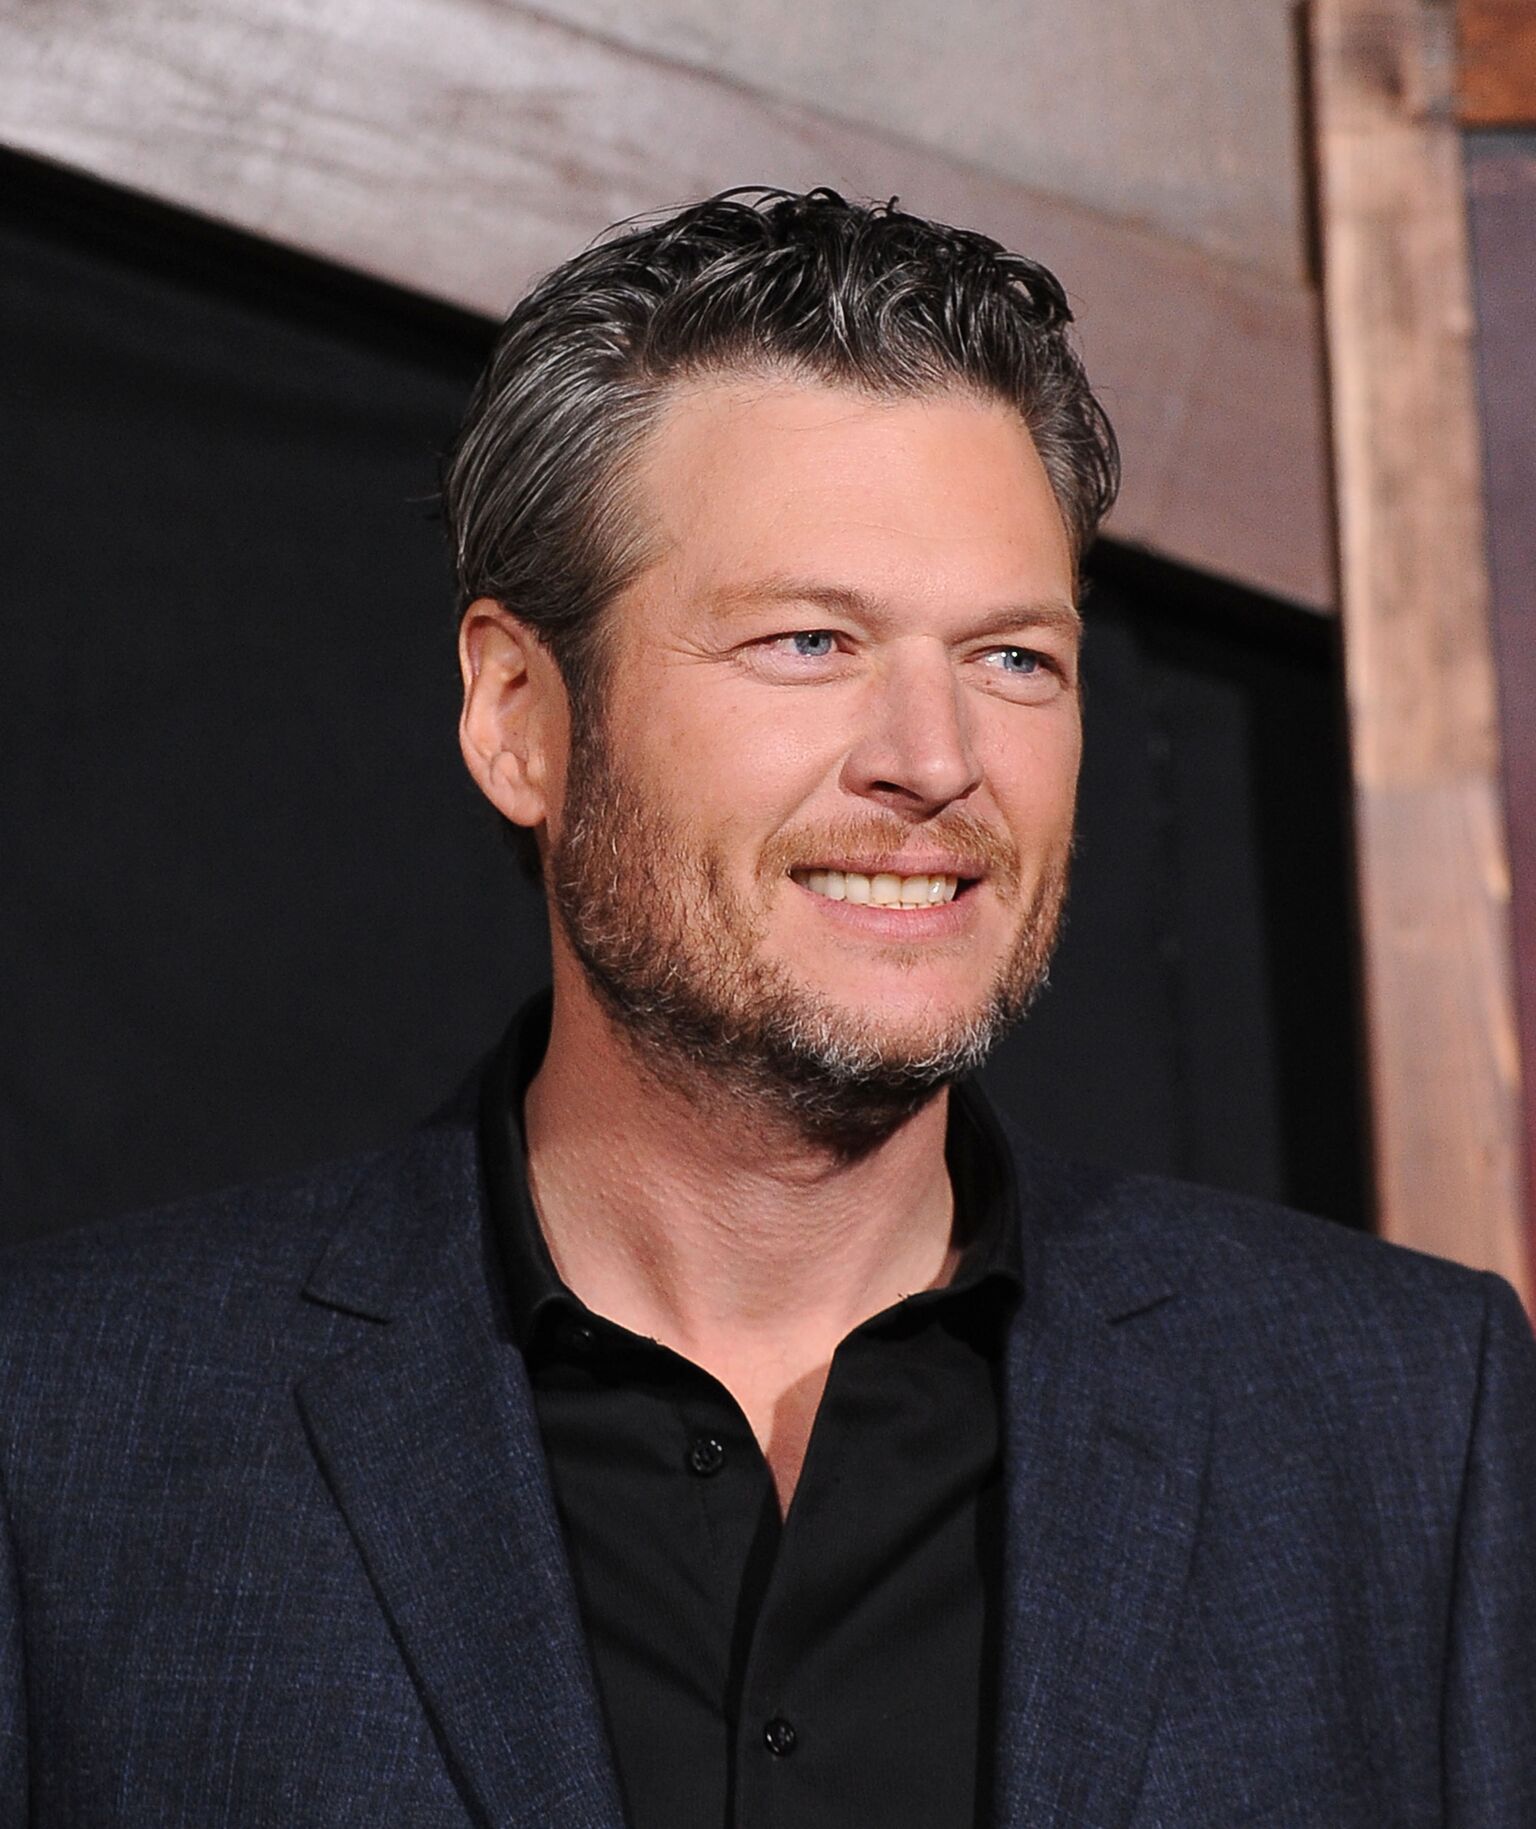 25 Facts about Blake Shelton From His Pet Turkey to Unconventional